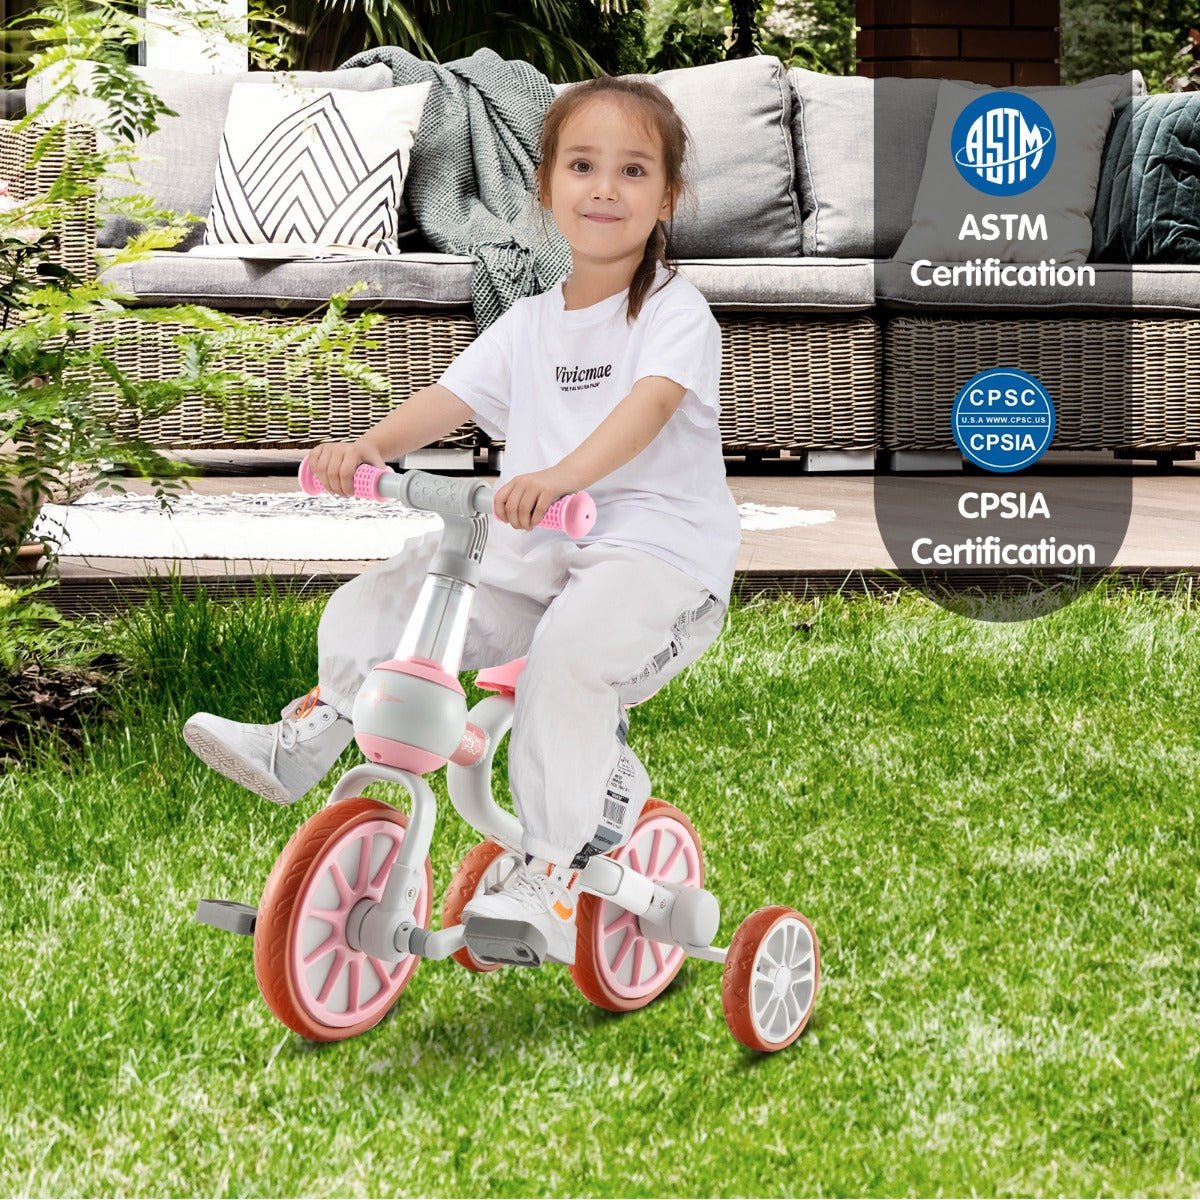 Adjustable Push Handle Kids Trike - Pink 4-in-1 Bike for Ages 2-4